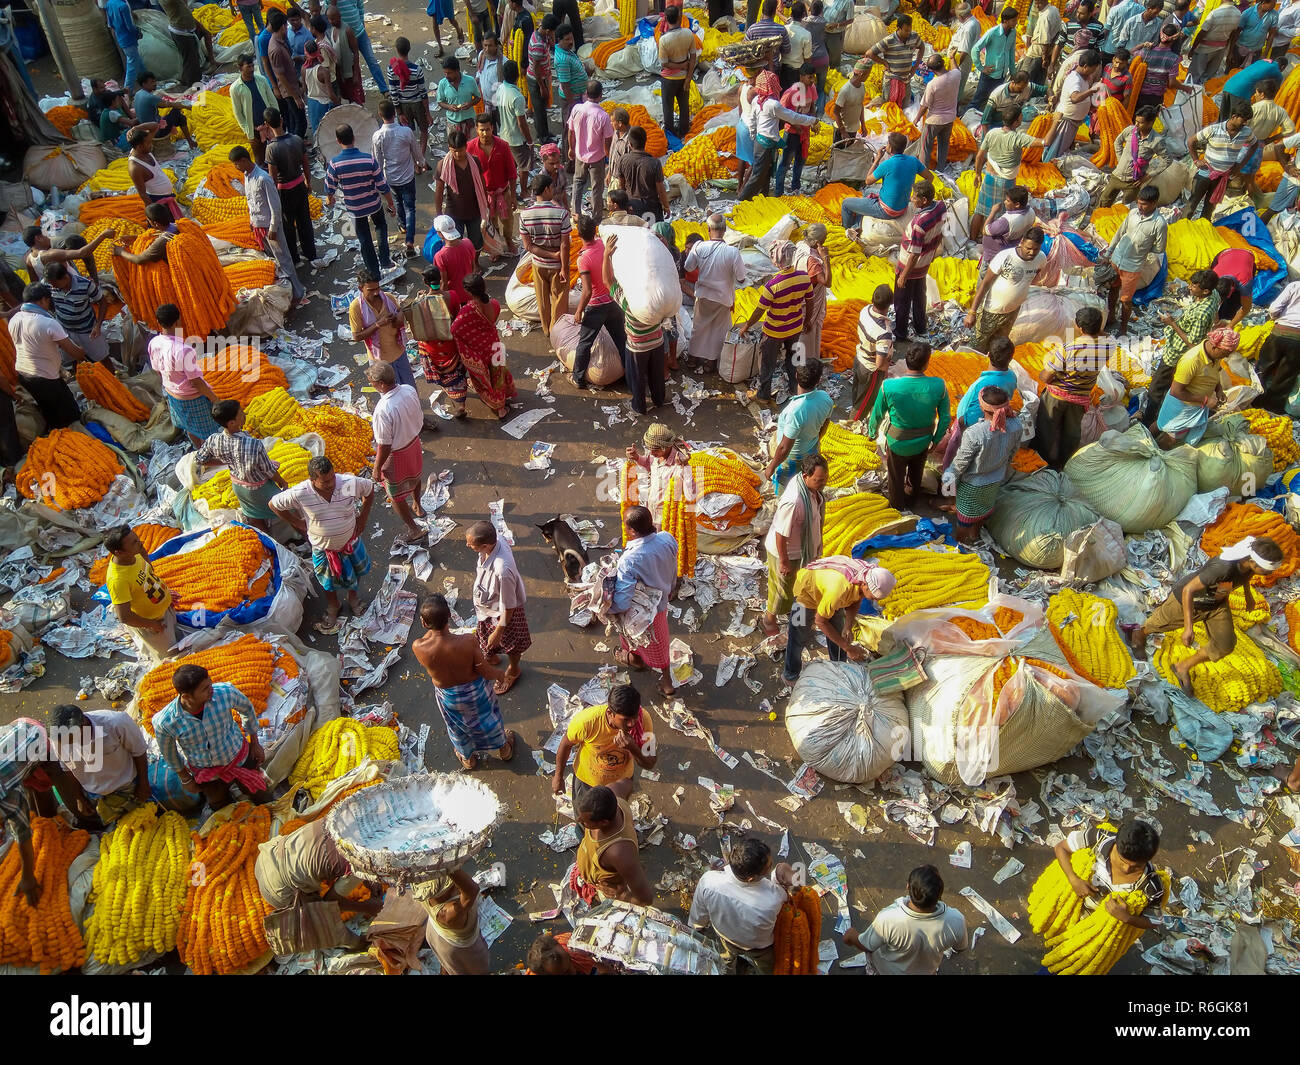 CALCUTTA, KOLKATA, INDIA - NOVEMBER 04, 2018: People buying and selling flowers and garlands at the flower market near mullick ghat on November 04, 20 Stock Photo